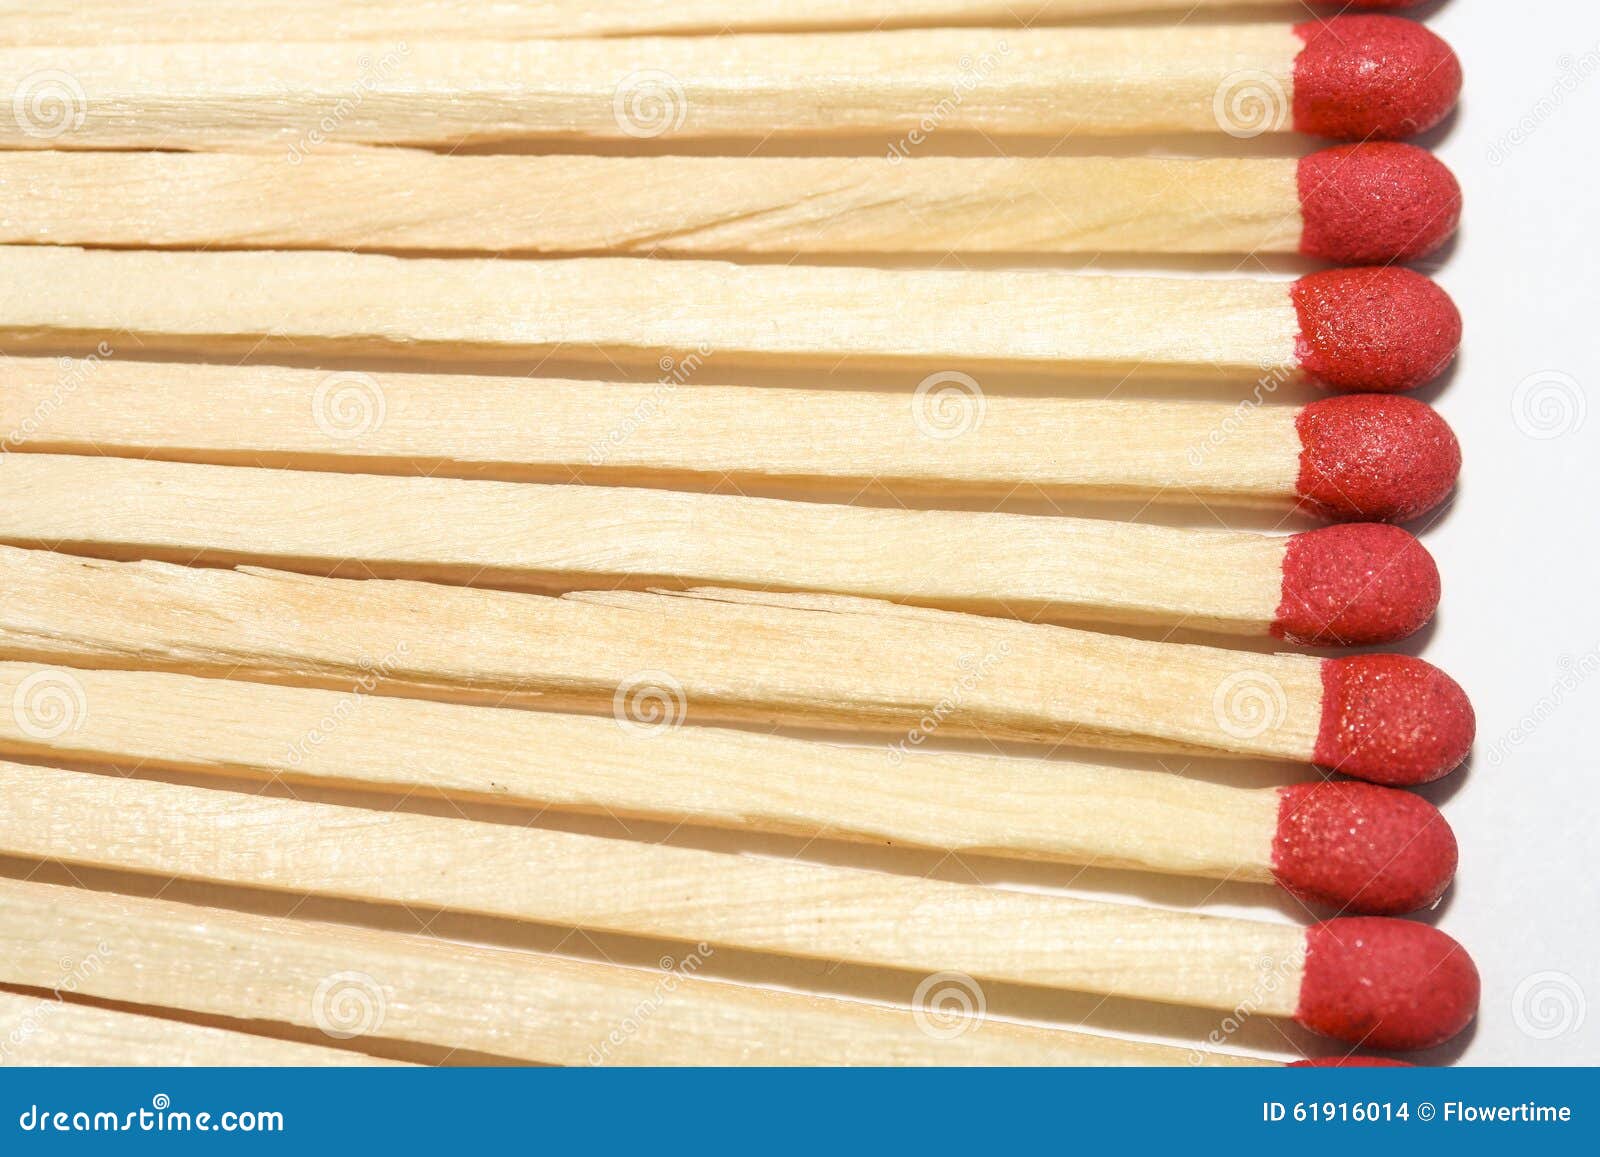 Line of matchsticks. stock photo. Image of object, close - 61916014